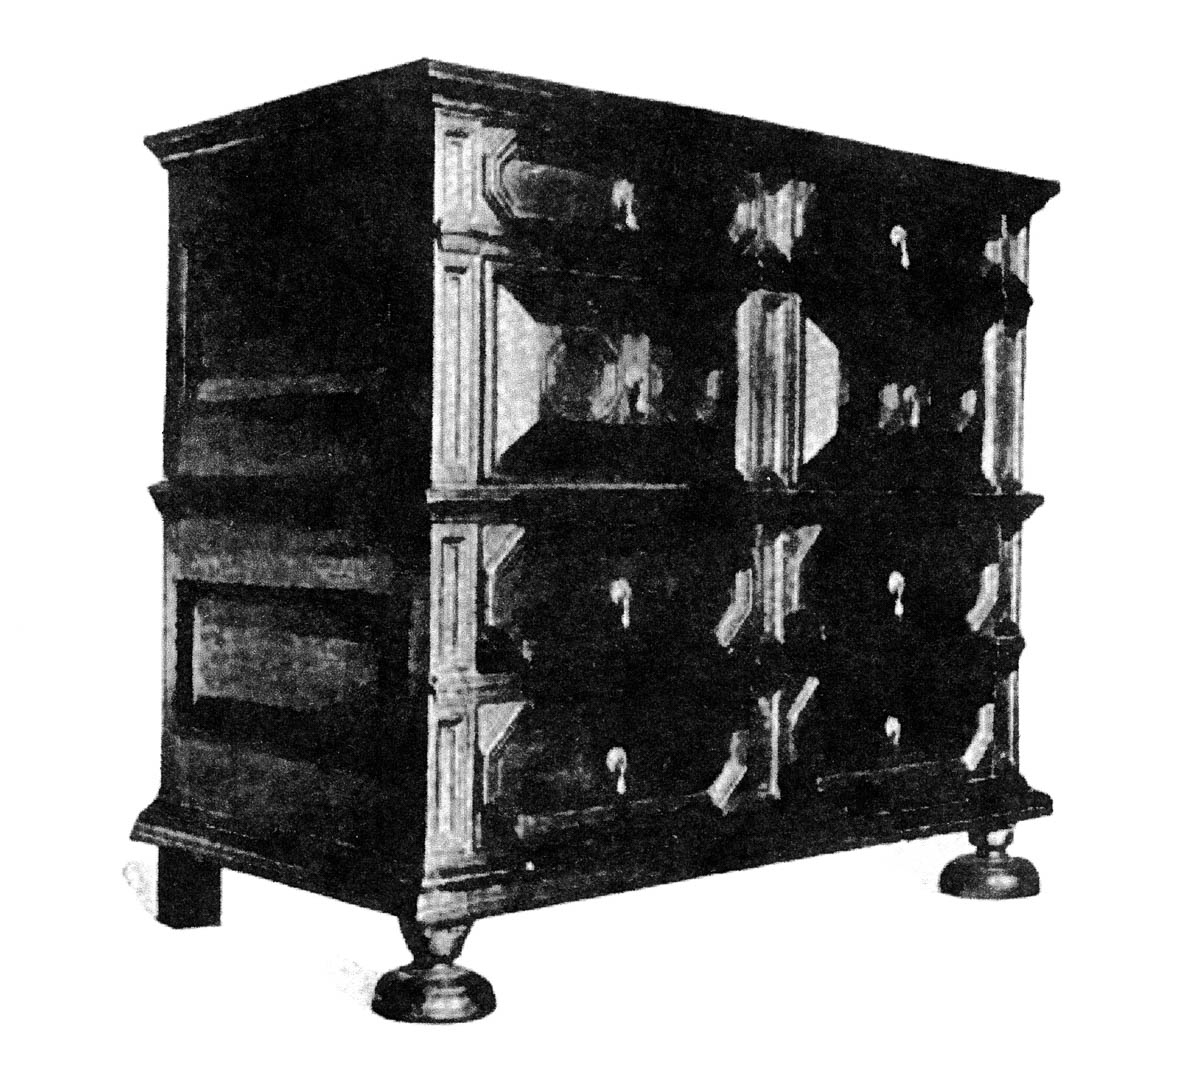 Paneled chest of drawers with flat onion turned feet, 1675–1700. Illustration in Luke Vincent Lockwood, Colonial Furniture in America, 1926.